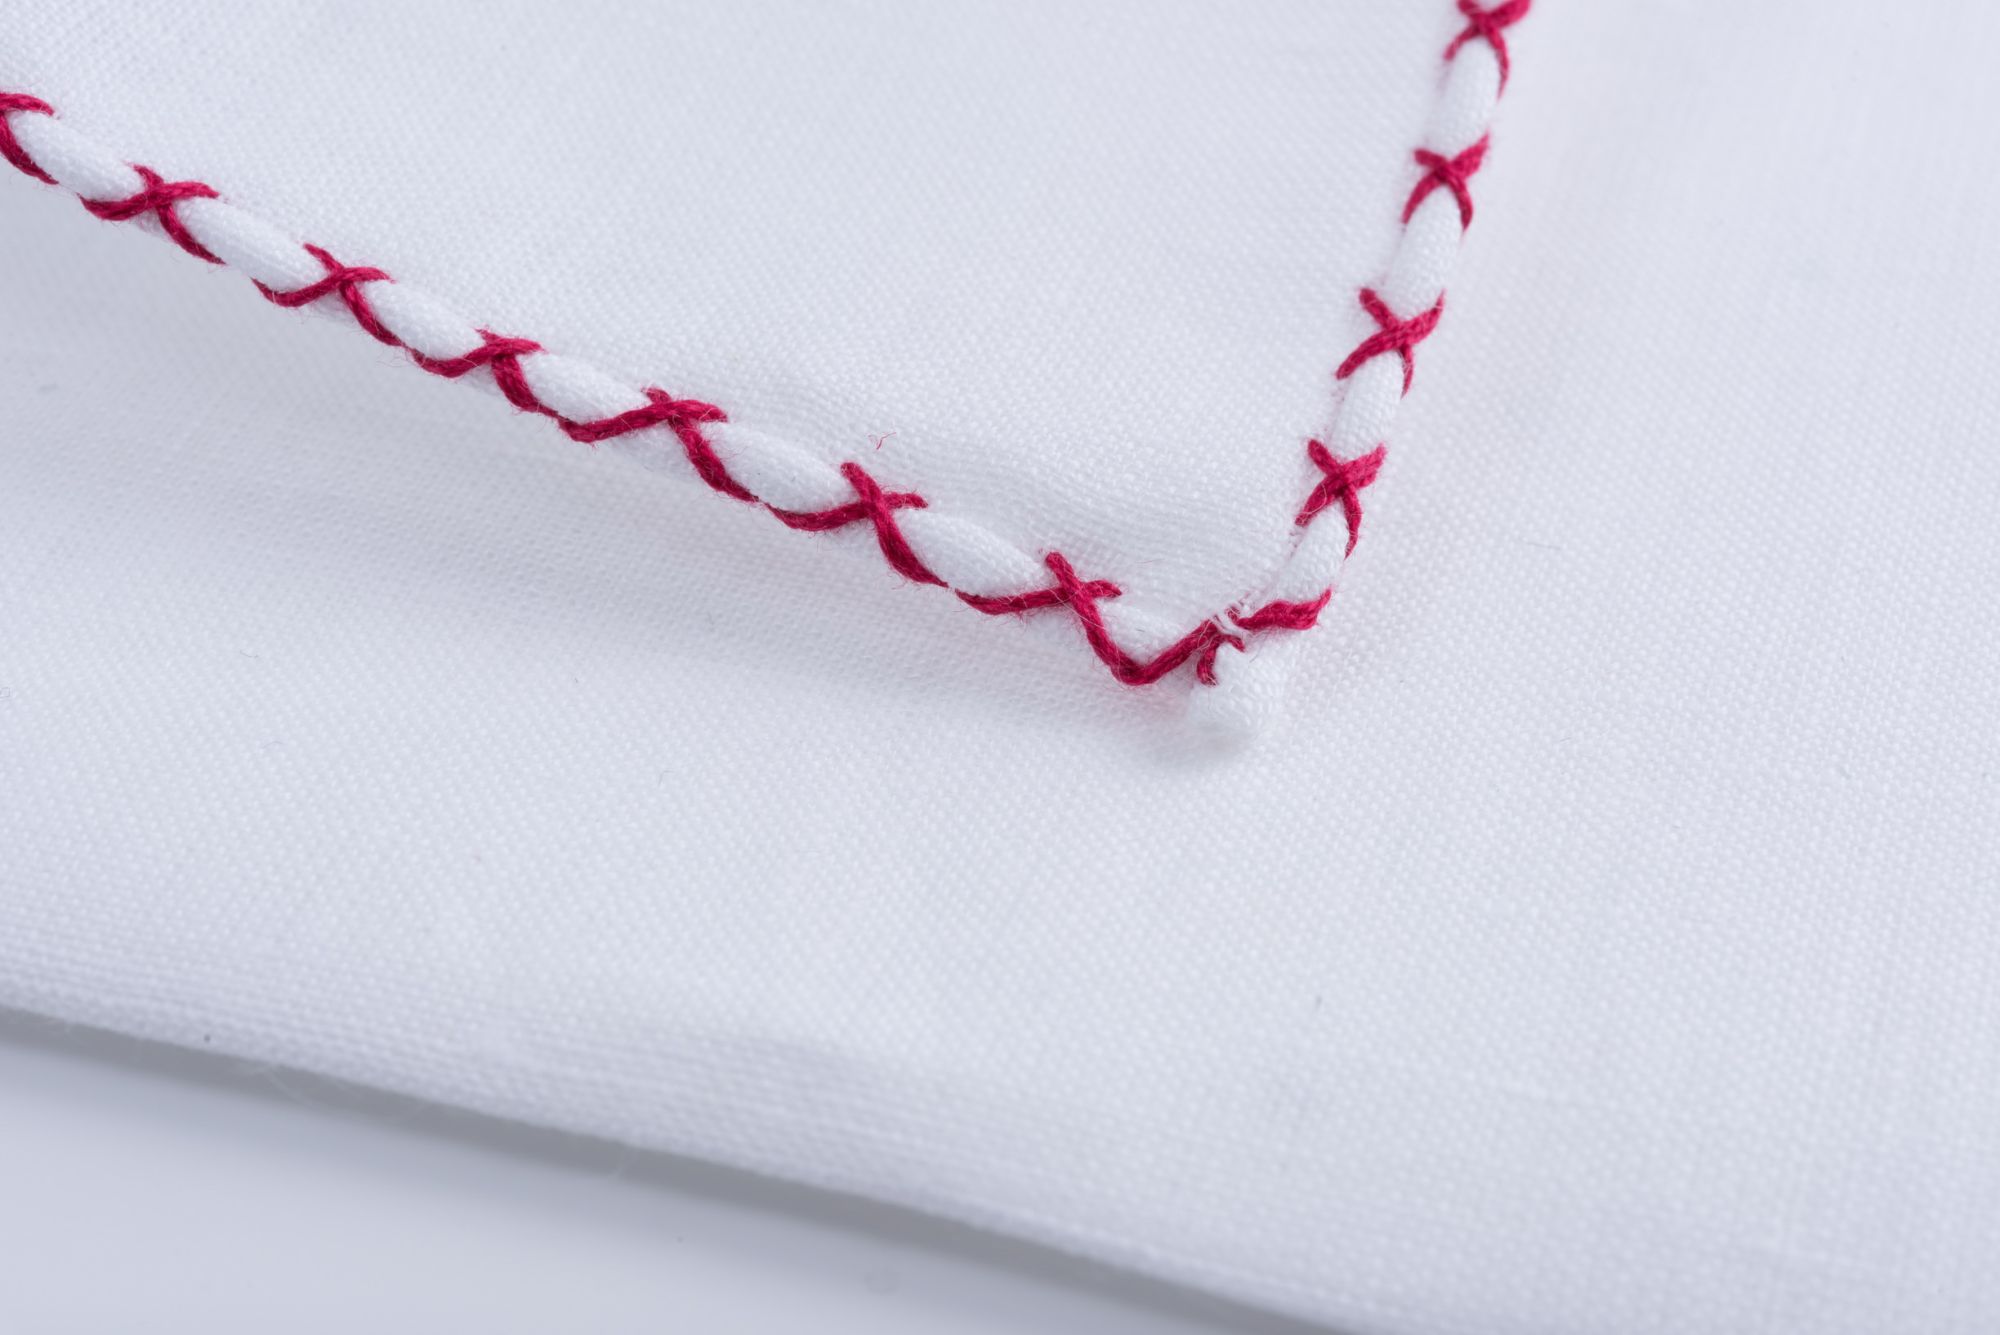 Burgundy Red Handcrafted Linen Pocket Square with White Handrolled X Stitch  - Fort Belvedere